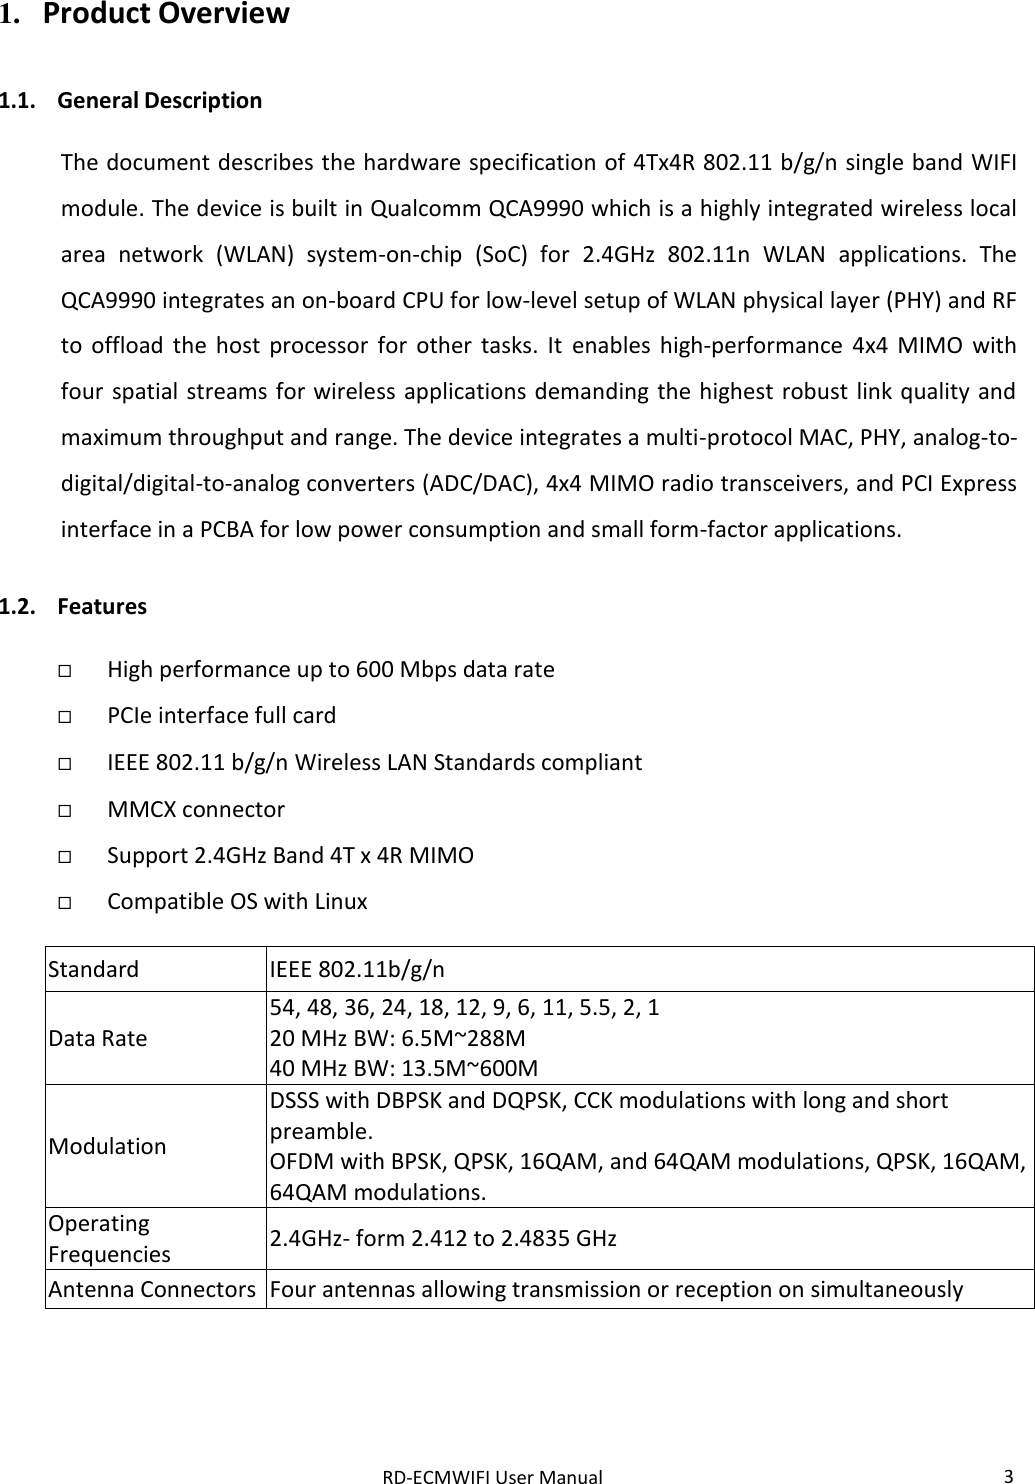 RD-ECMWIFI User Manual 3  1. Product Overview  1.1. General Description  The document describes the hardware specification of 4Tx4R 802.11 b/g/n single band WIFI module. The device is built in Qualcomm QCA9990 which is a highly integrated wireless local area  network  (WLAN)  system-on-chip  (SoC)  for  2.4GHz  802.11n  WLAN  applications.  The QCA9990 integrates an on-board CPU for low-level setup of WLAN physical layer (PHY) and RF to  offload  the  host  processor  for  other  tasks.  It  enables  high-performance  4x4  MIMO  with four  spatial streams for wireless applications demanding  the highest robust  link quality and maximum throughput and range. The device integrates a multi-protocol MAC, PHY, analog-to-digital/digital-to-analog converters (ADC/DAC), 4x4 MIMO radio transceivers, and PCI Express interface in a PCBA for low power consumption and small form-factor applications.  1.2. Features   High performance up to 600 Mbps data rate  PCIe interface full card  IEEE 802.11 b/g/n Wireless LAN Standards compliant  MMCX connector   Support 2.4GHz Band 4T x 4R MIMO  Compatible OS with Linux  Standard IEEE 802.11b/g/n Data Rate 54, 48, 36, 24, 18, 12, 9, 6, 11, 5.5, 2, 1 20 MHz BW: 6.5M~288M 40 MHz BW: 13.5M~600M Modulation DSSS with DBPSK and DQPSK, CCK modulations with long and short preamble. OFDM with BPSK, QPSK, 16QAM, and 64QAM modulations, QPSK, 16QAM, 64QAM modulations. Operating Frequencies 2.4GHz- form 2.412 to 2.4835 GHz Antenna Connectors Four antennas allowing transmission or reception on simultaneously    